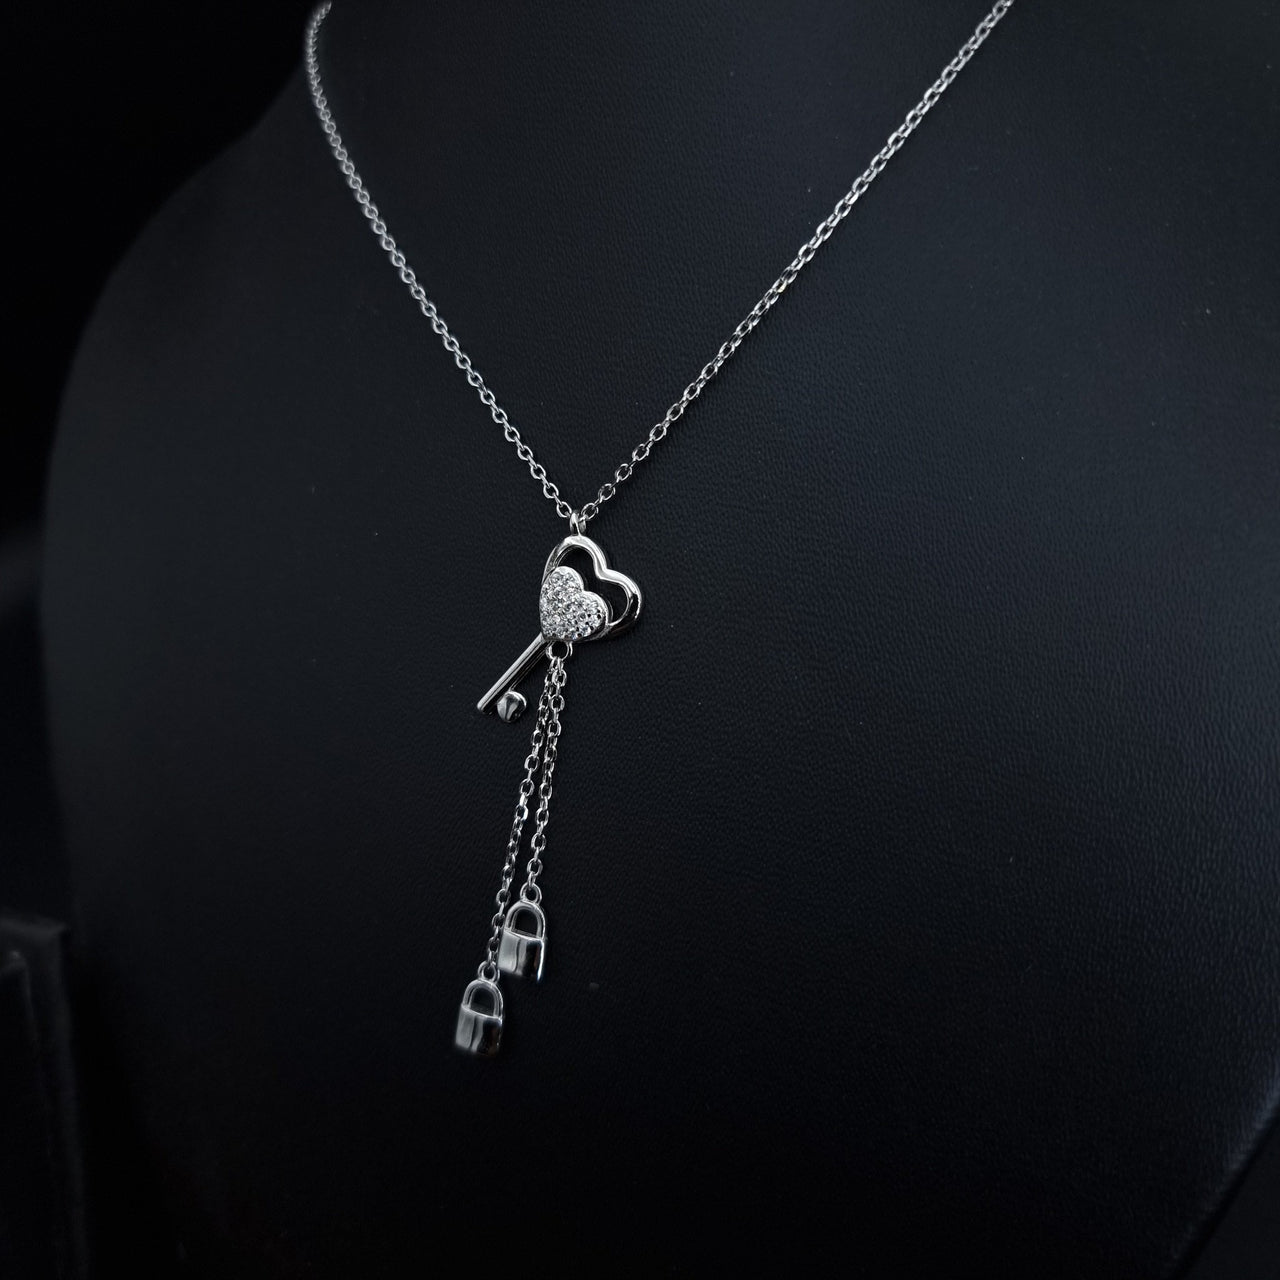 Heart Key And Lock Necklace